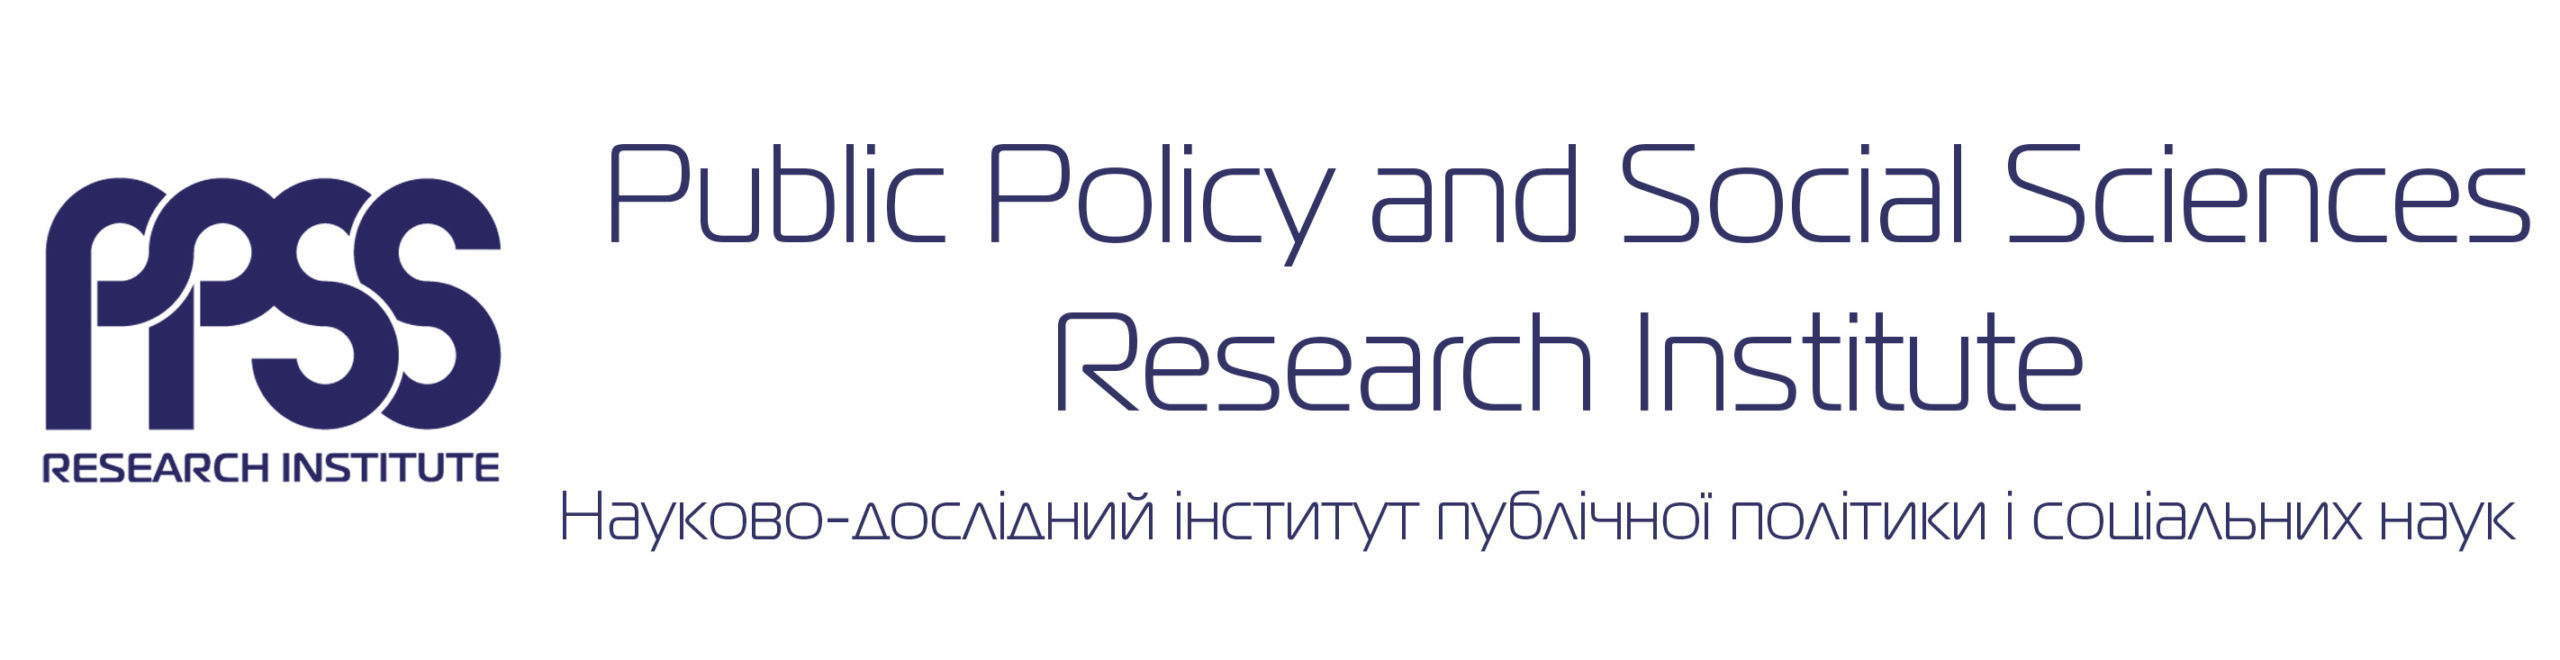 Public Policy and Social Sciences Research Institute